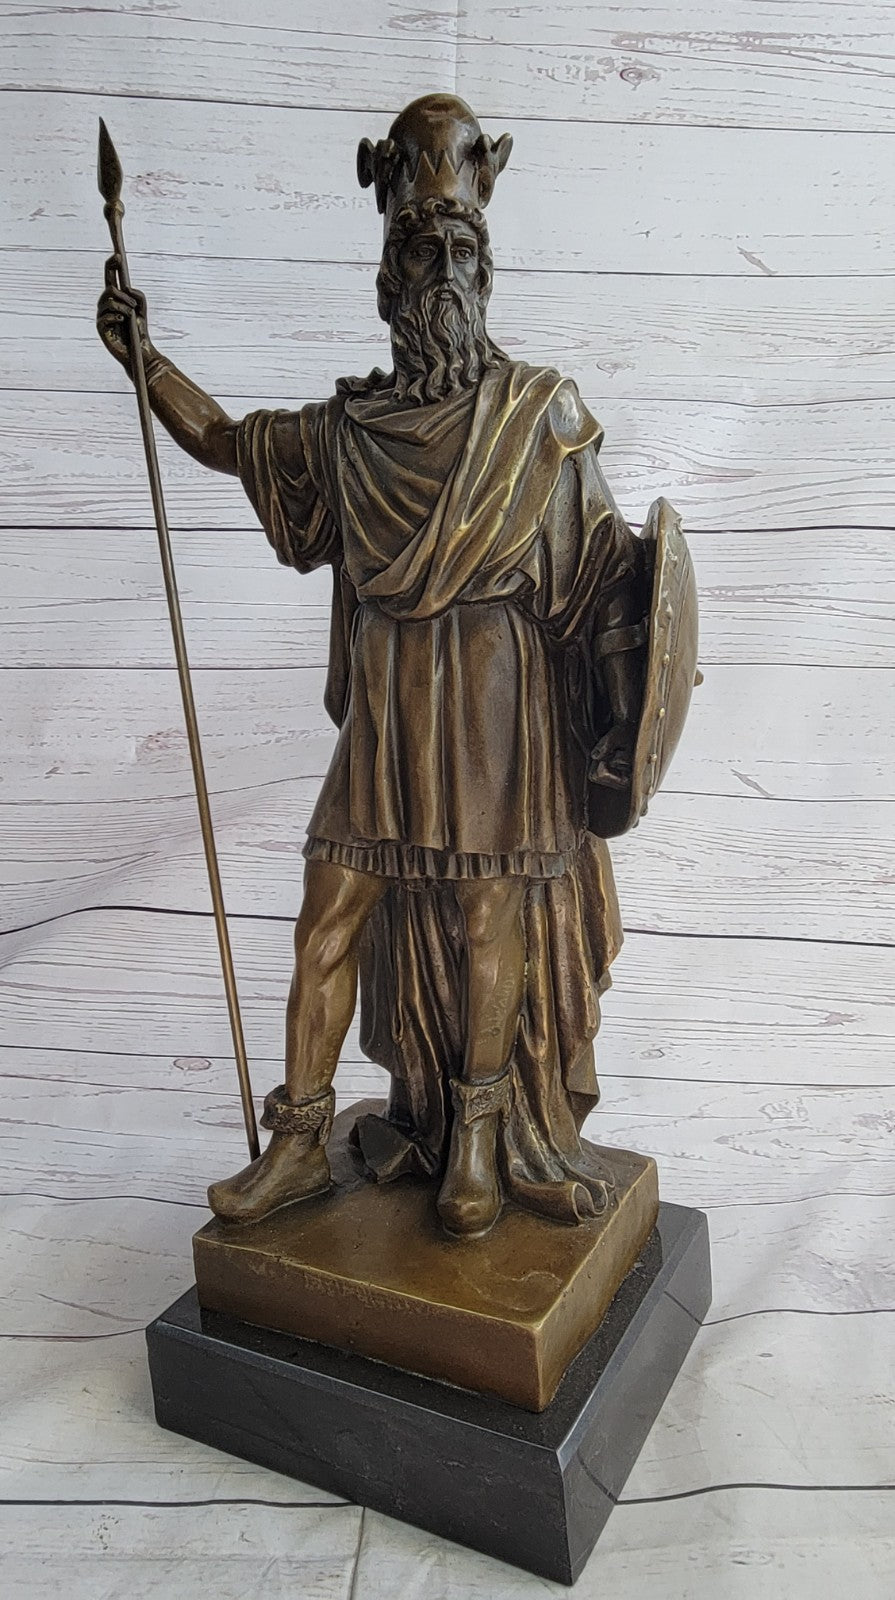 Handcrafted bronze sculpture SALE Warrior" Persia Of King Stunning 21" Tall Decor